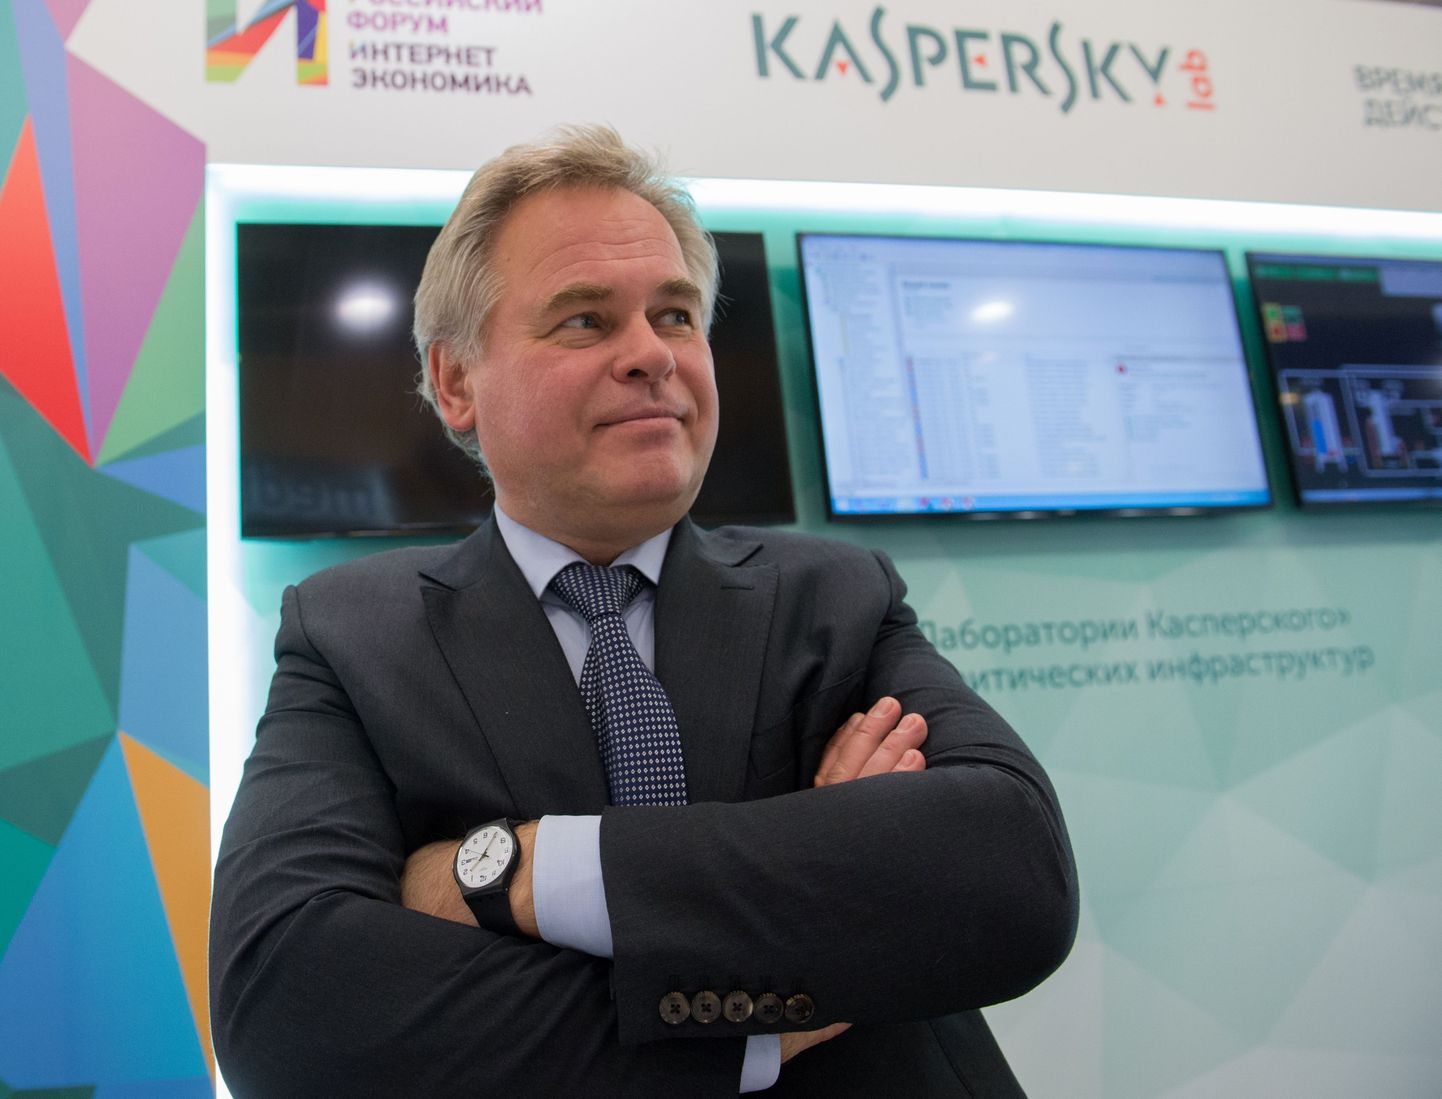 2764147 12/22/2015 December 22, 2015. Head of Kaspersky Lab Yevgeny Kaspersky at his company's display stand at the first Russian Internet Economy forum. Sergey Guneev/Sputnik